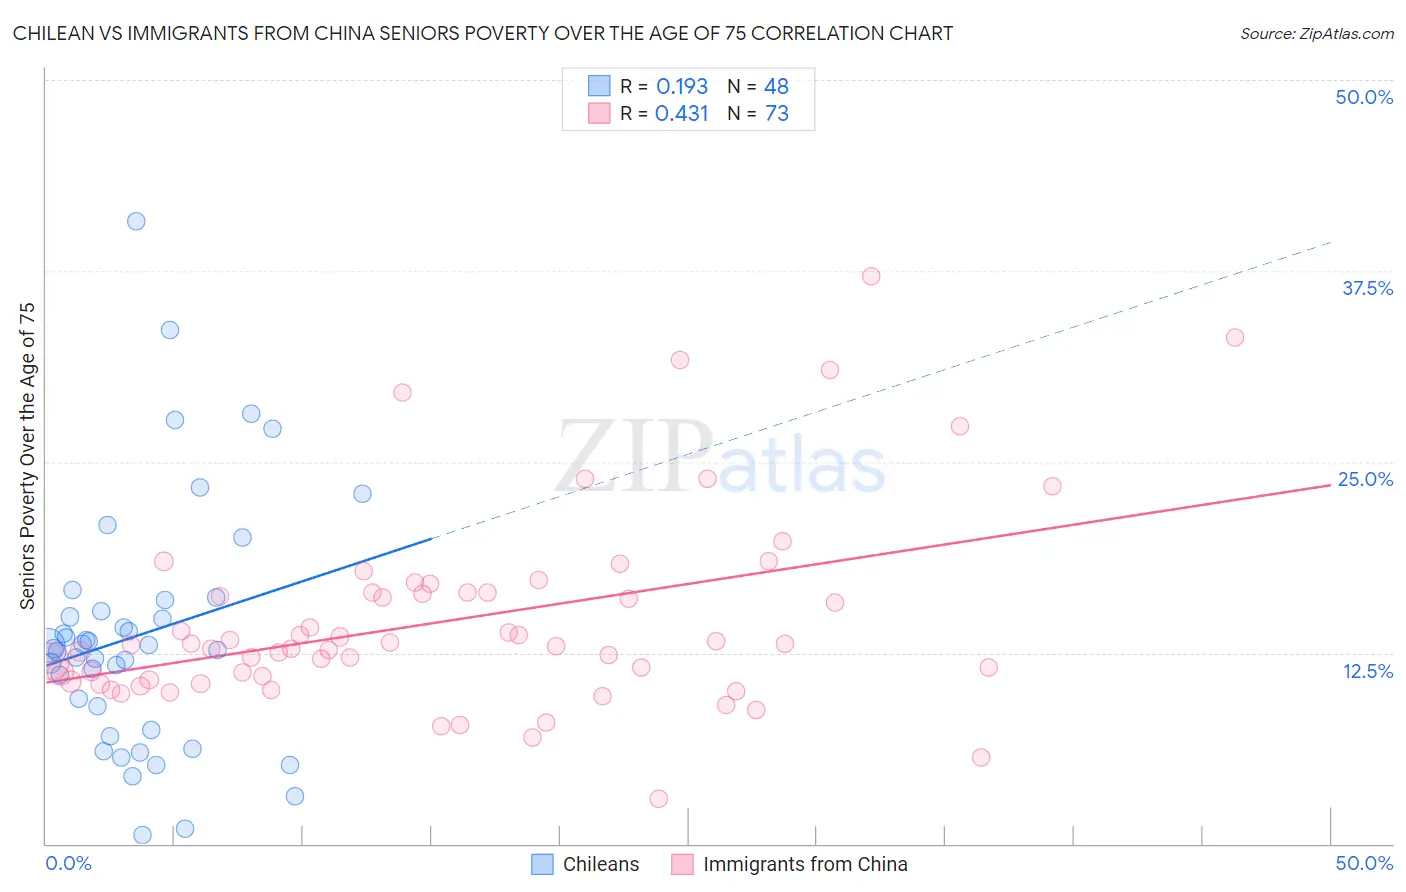 Chilean vs Immigrants from China Seniors Poverty Over the Age of 75